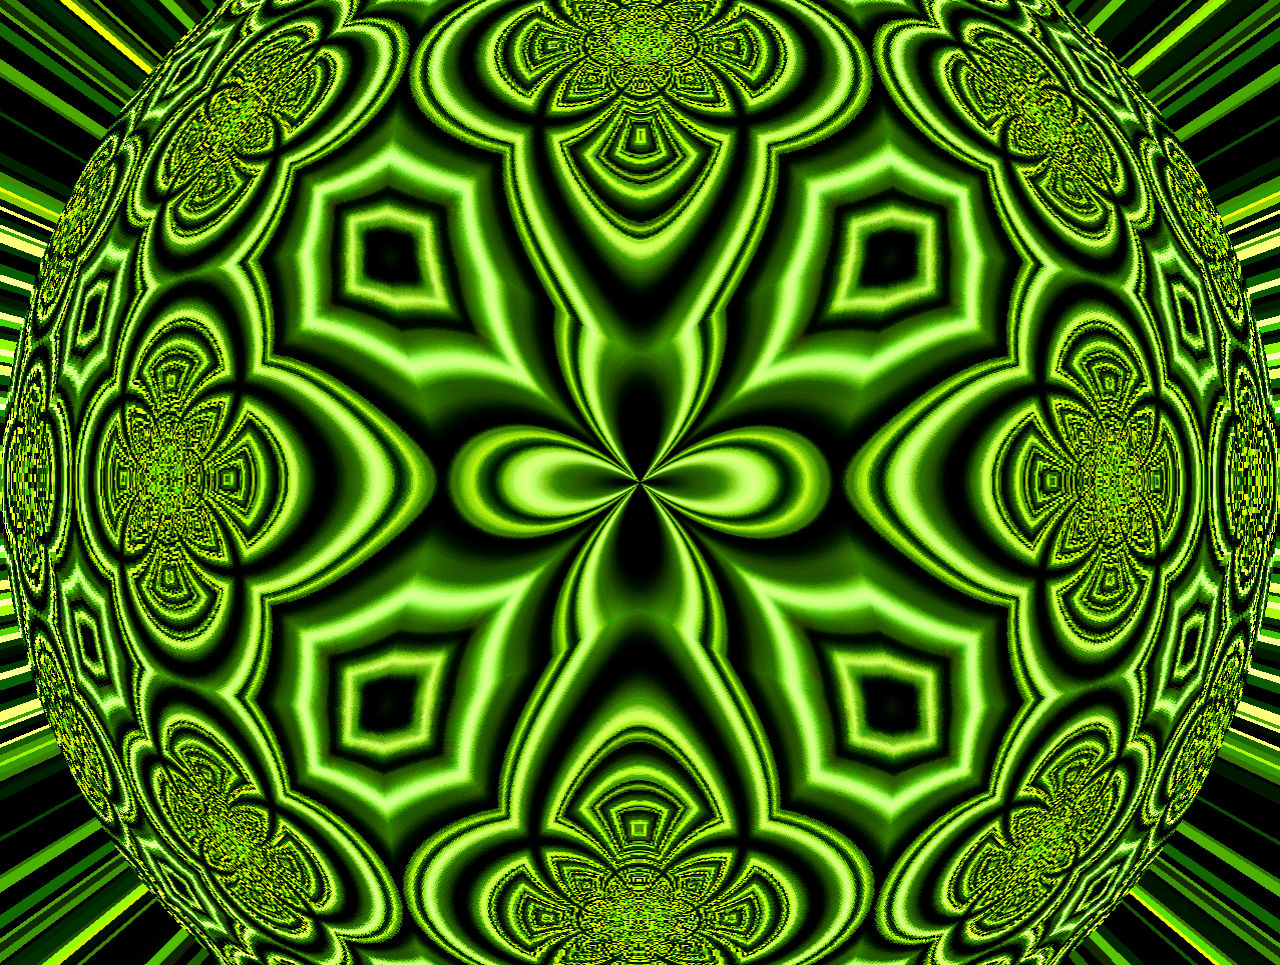 Gallery For Celtic Cross Background Displaying Image